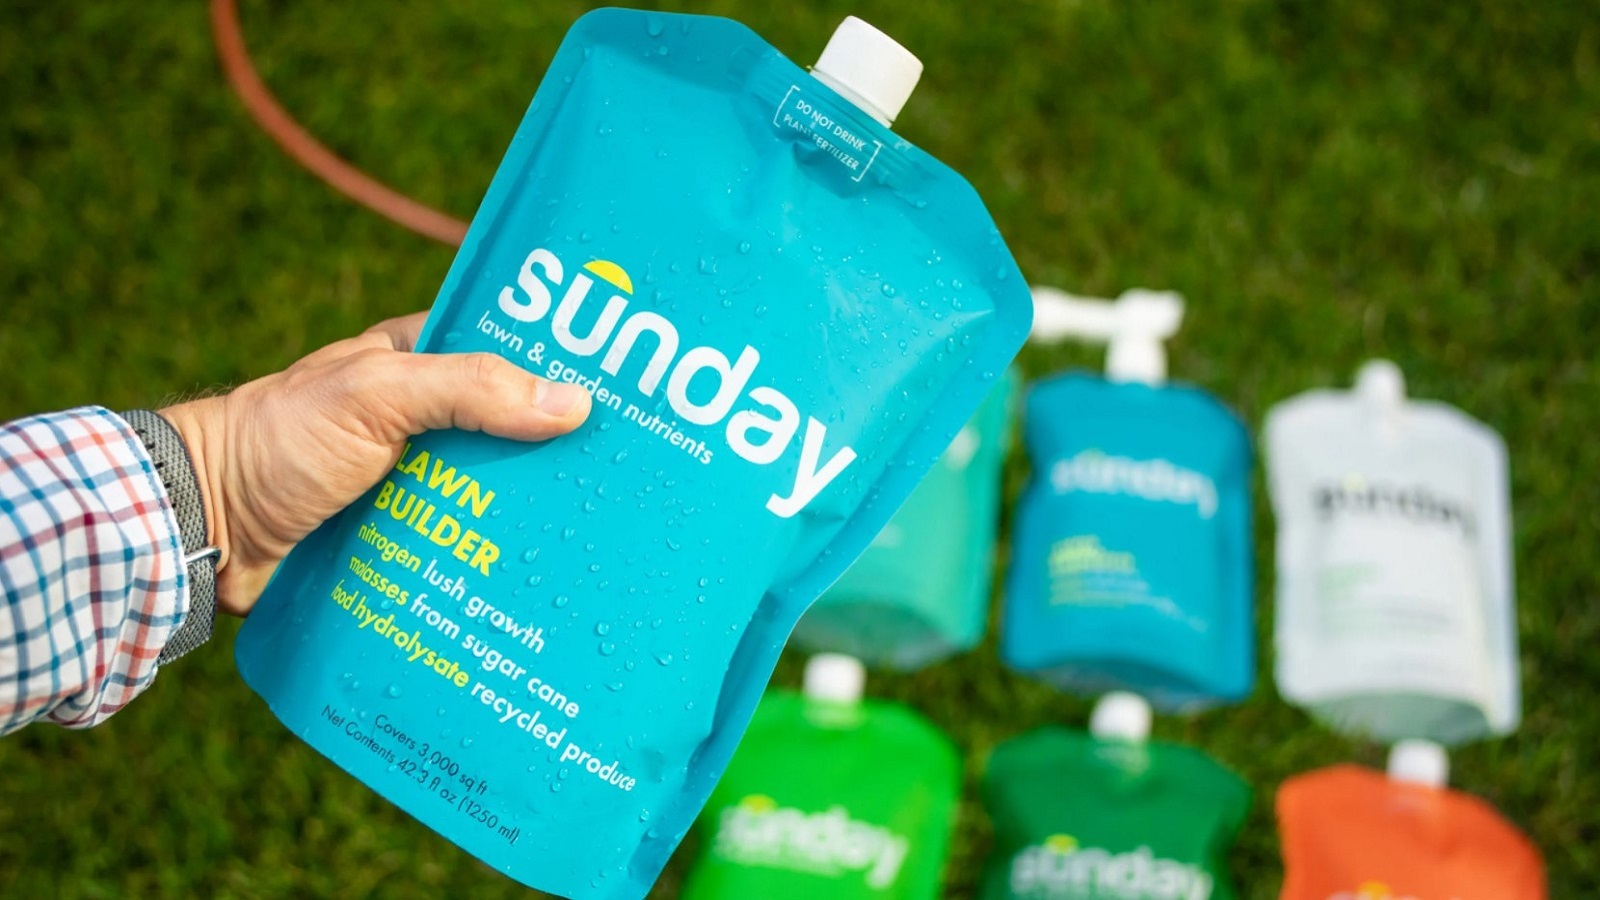 Sunday Lawn Care Review: Does It Really Work?